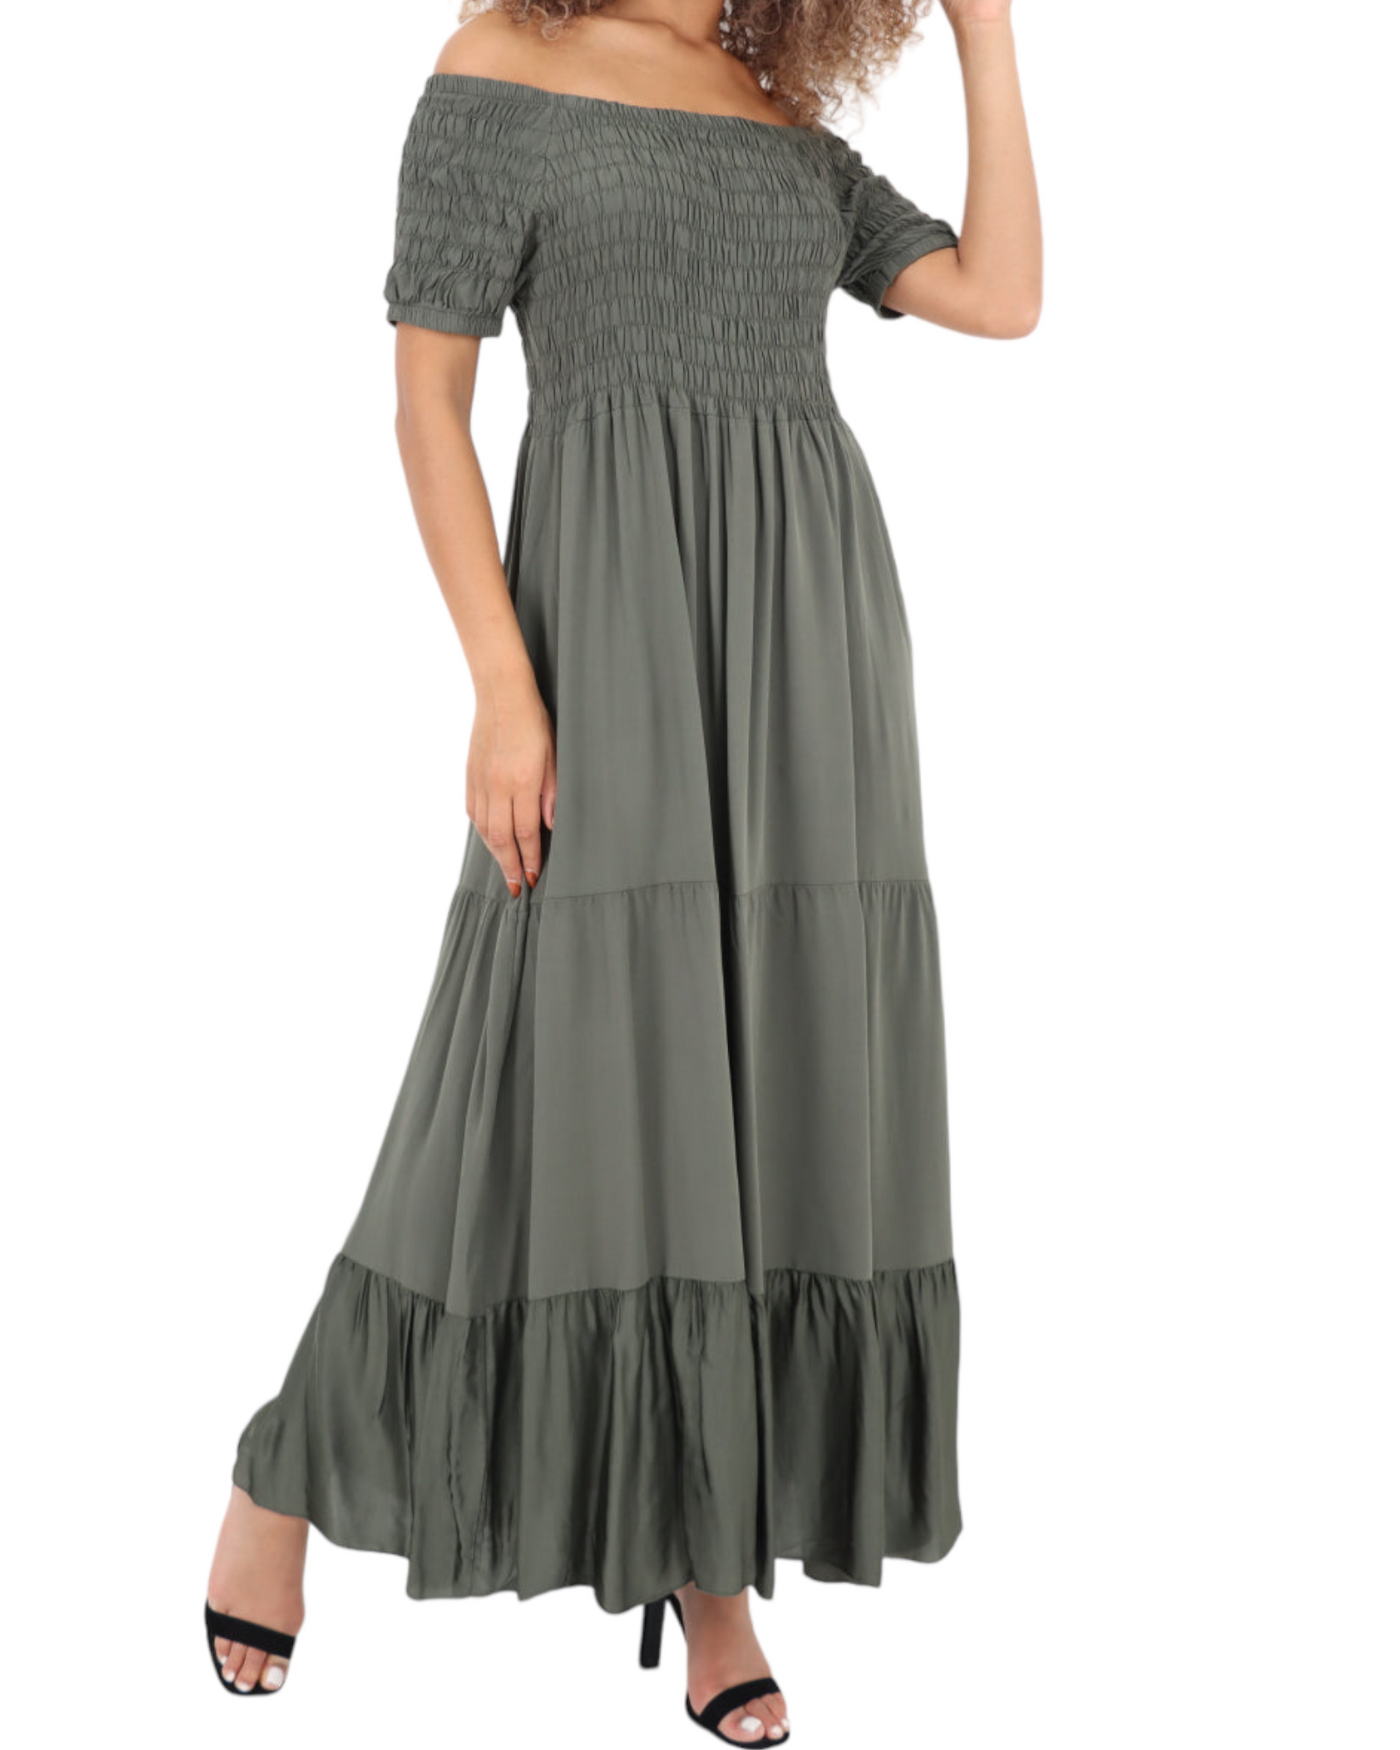 Off Shoulder Shirred Elasticated Tiered Maxi Dress